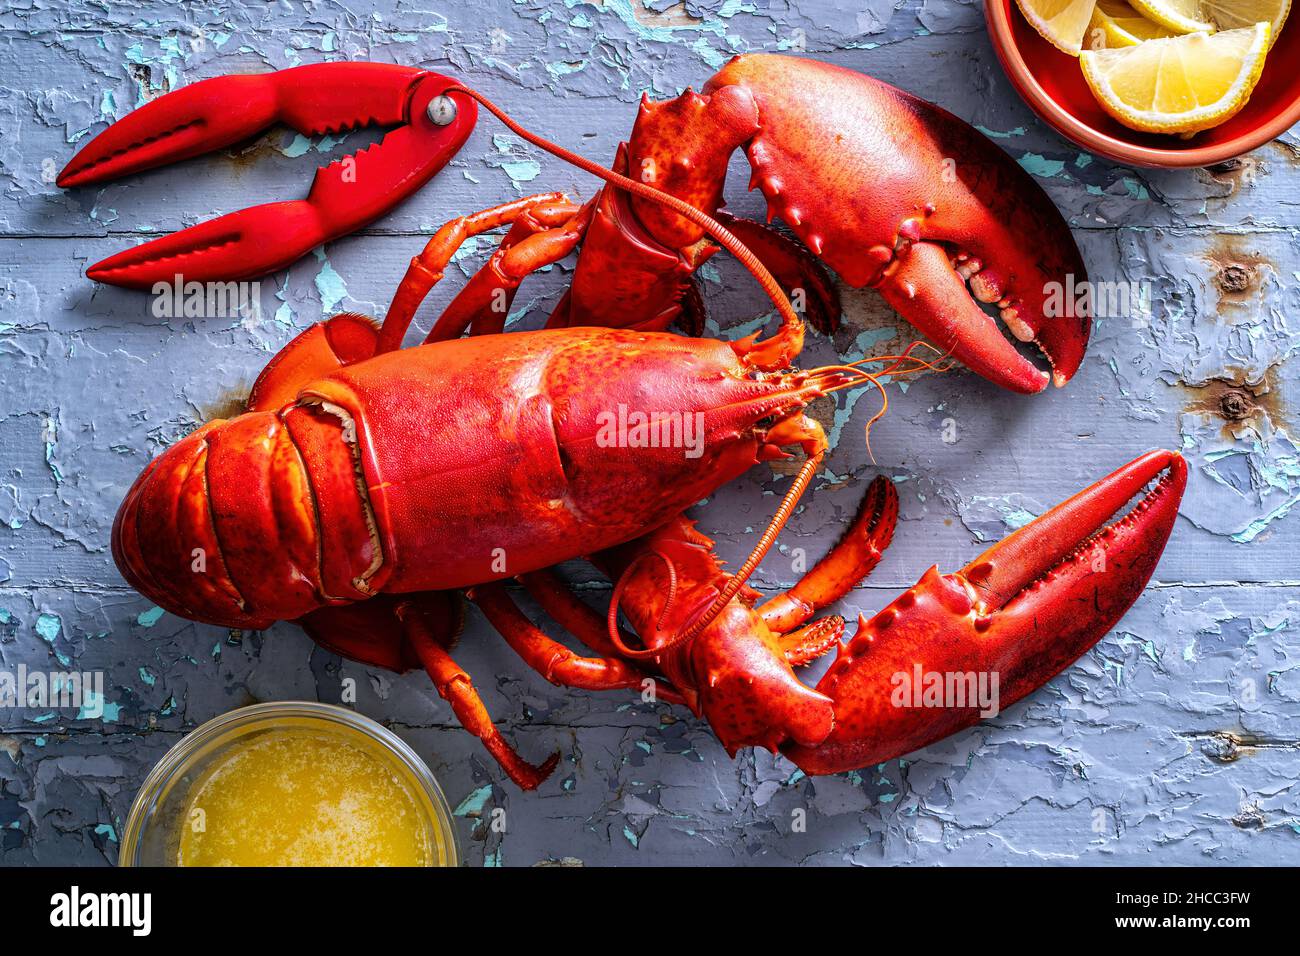 A delicious North Atlantic lobster on a rustic picnic table. Stock Photo